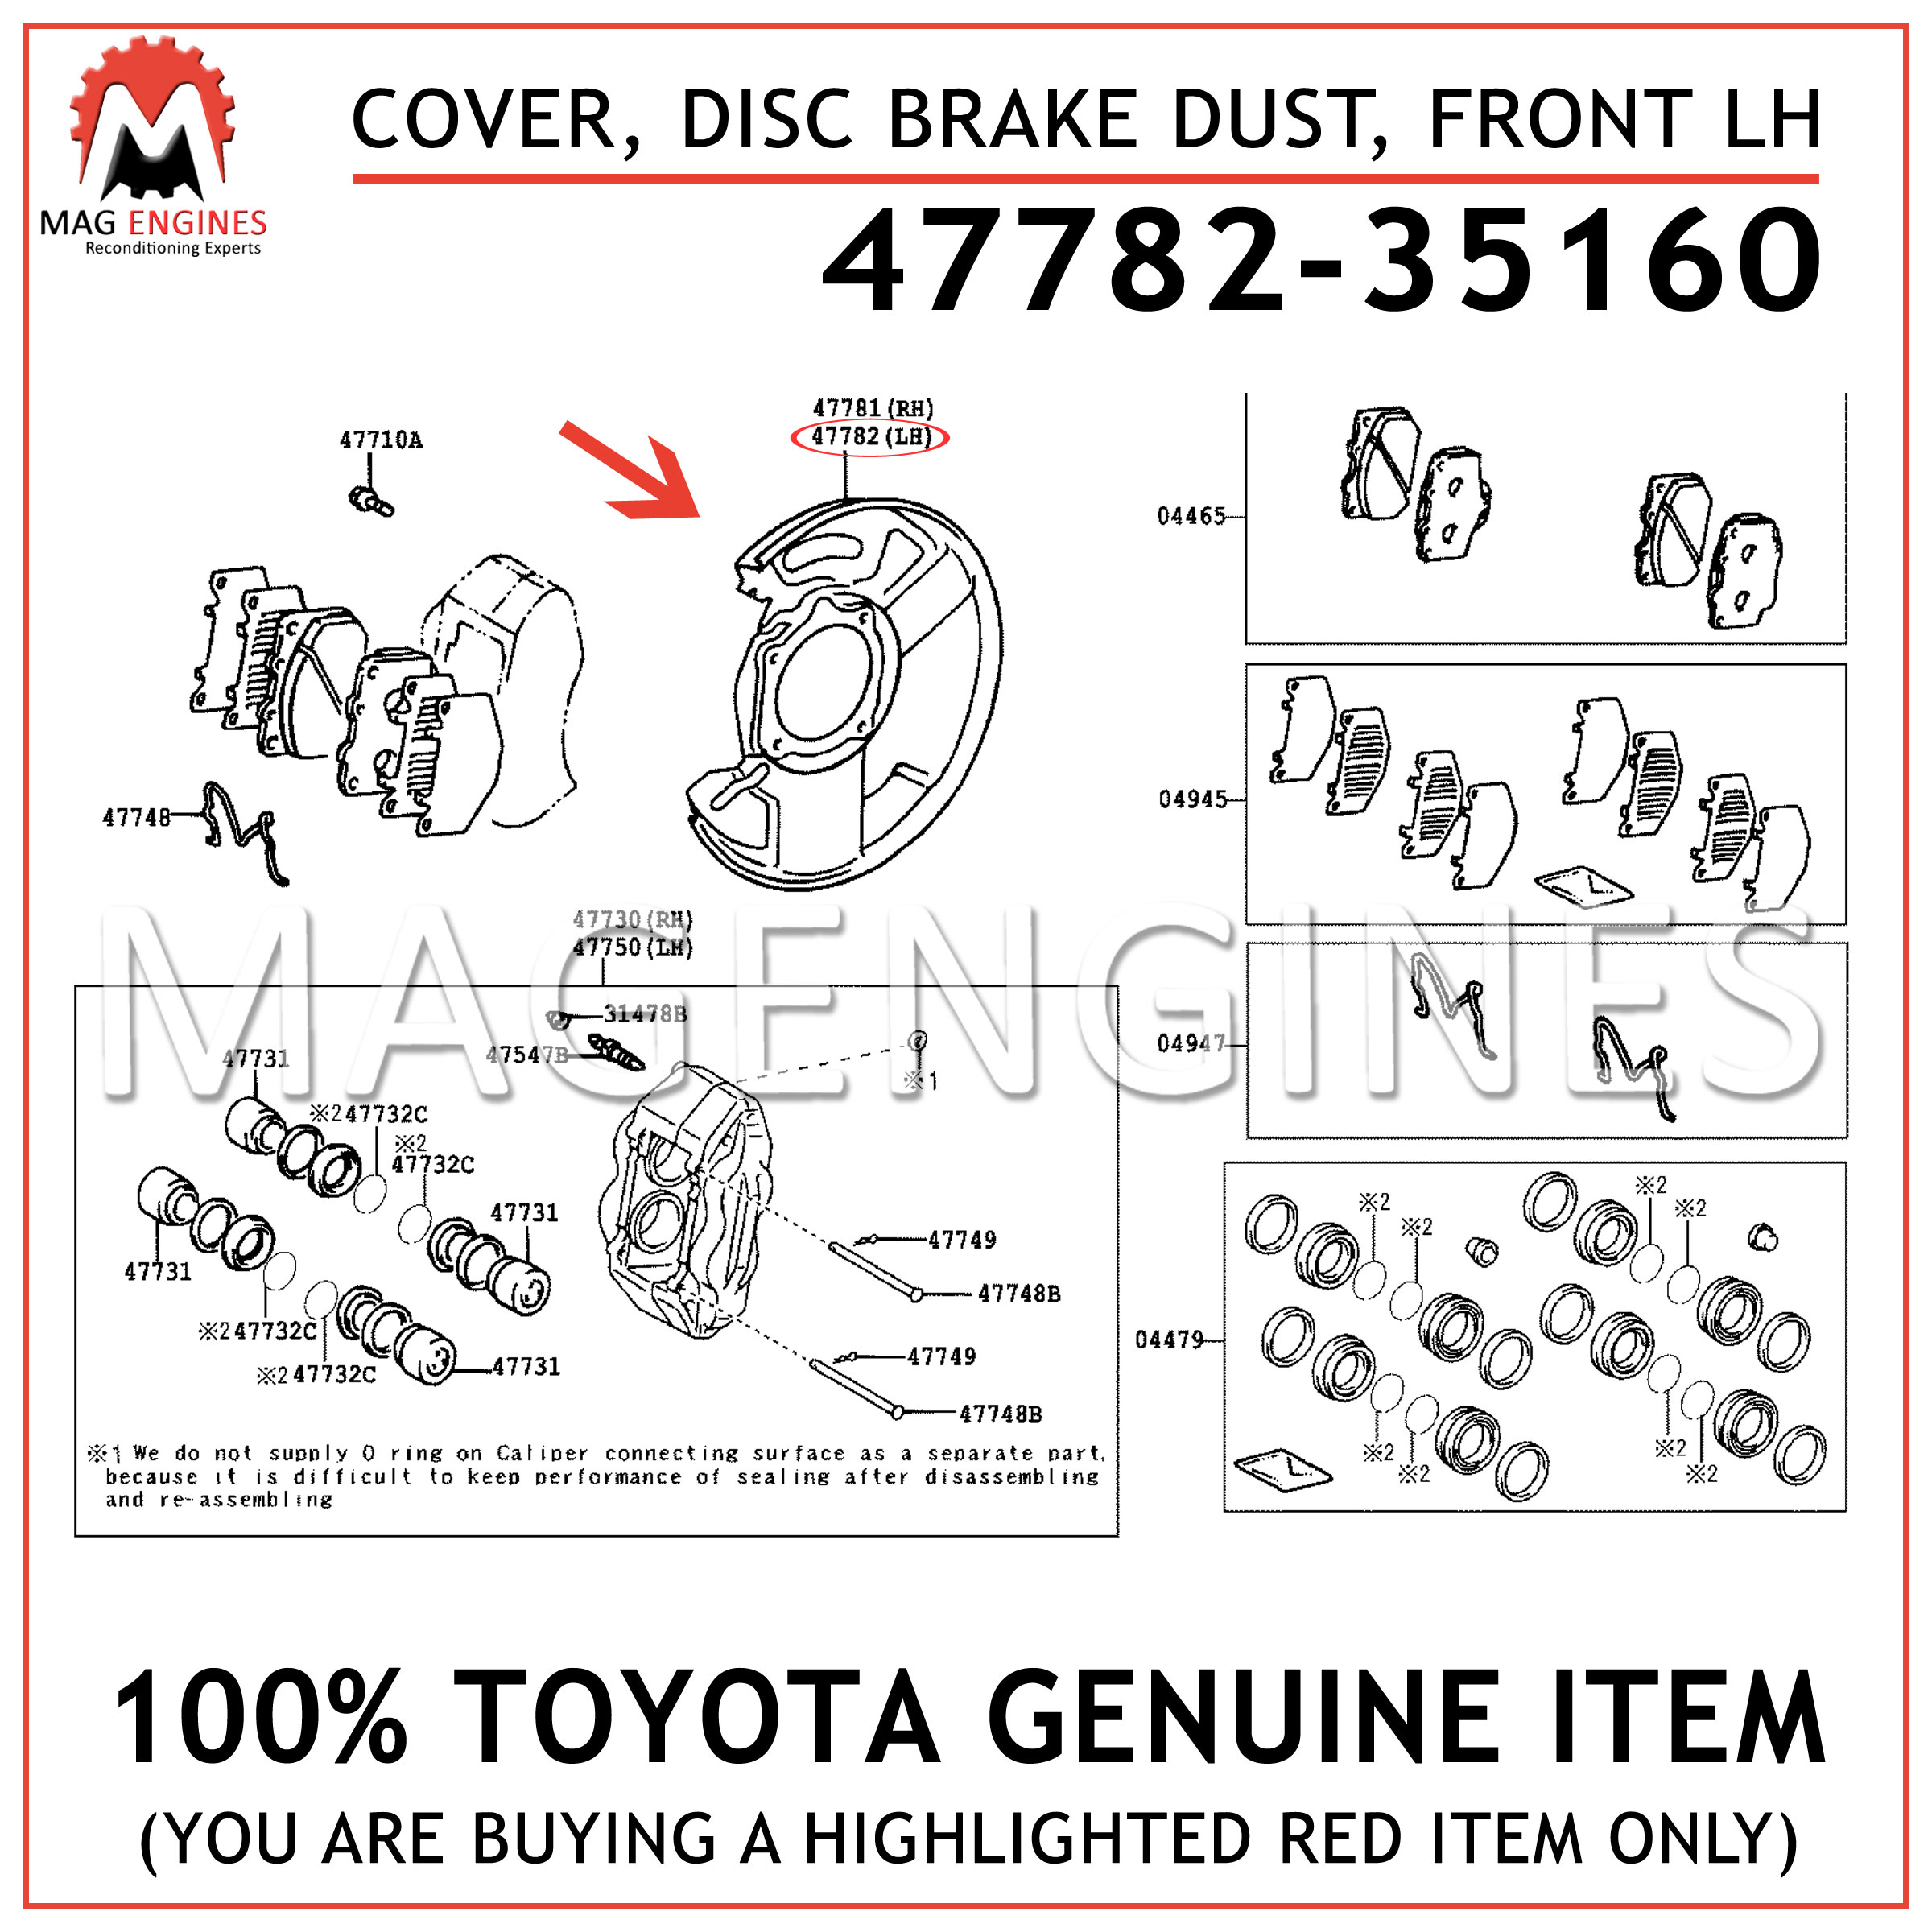 DISC BRAKE DUST 4778235160 Genuine Toyota COVER FRONT LH 47782-35160